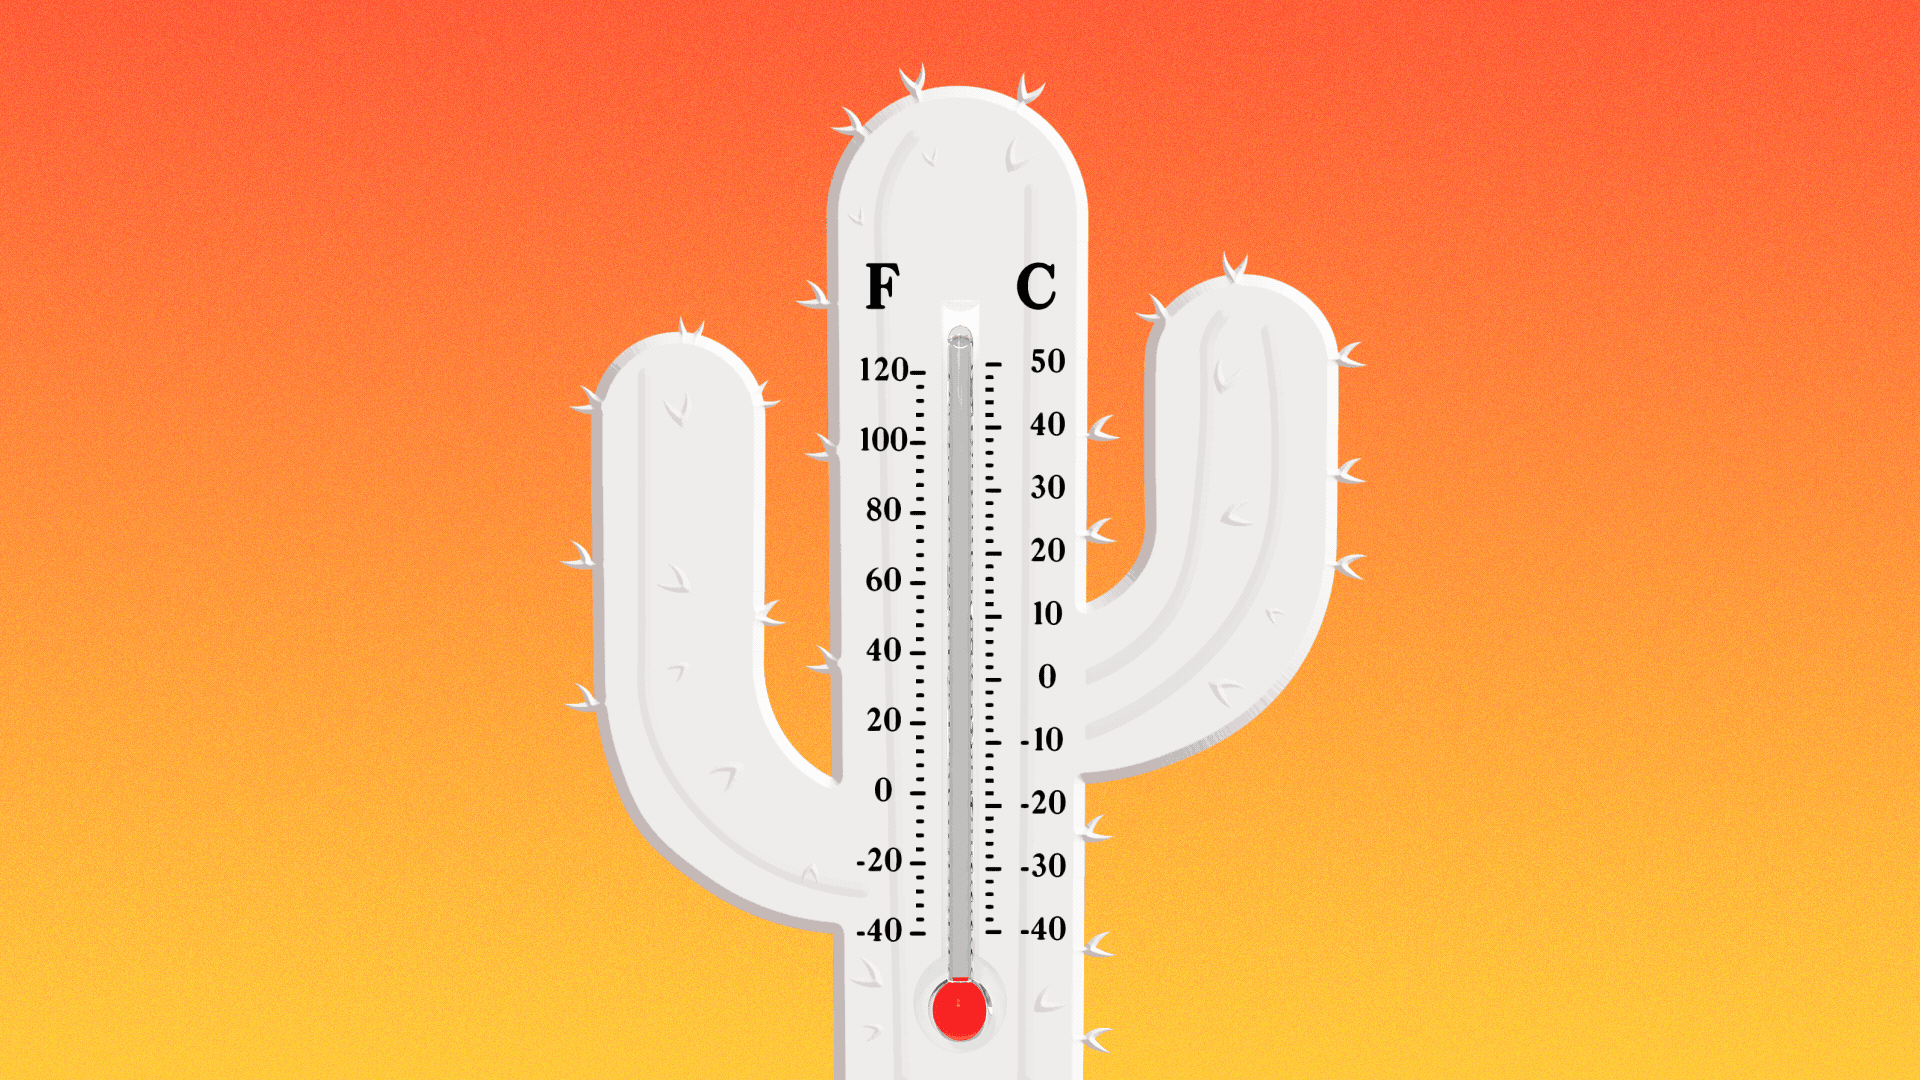 Animated gif of a thermometer in the shape of a cactus rising to 120+ degrees, and then back down.